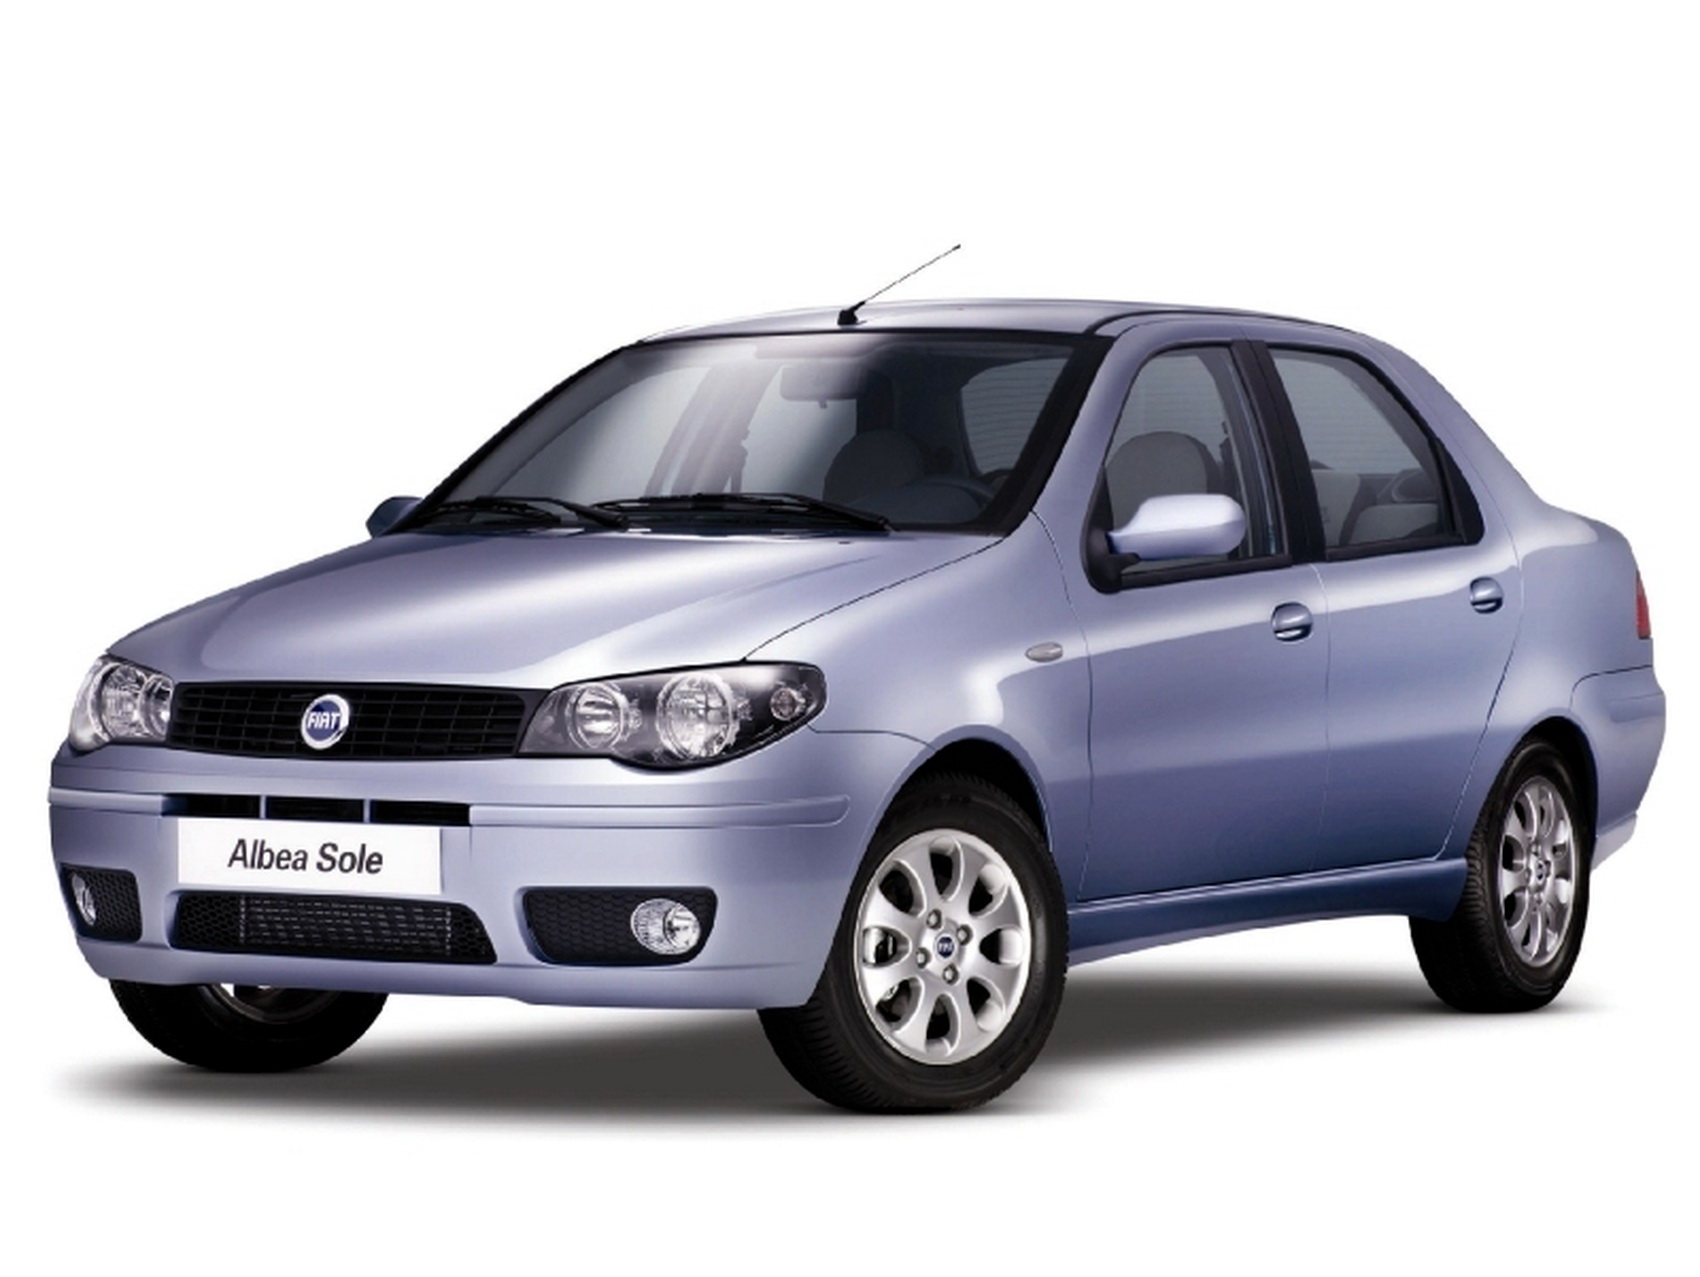 Fiat Albea 2015 Review, Amazing Pictures and Images